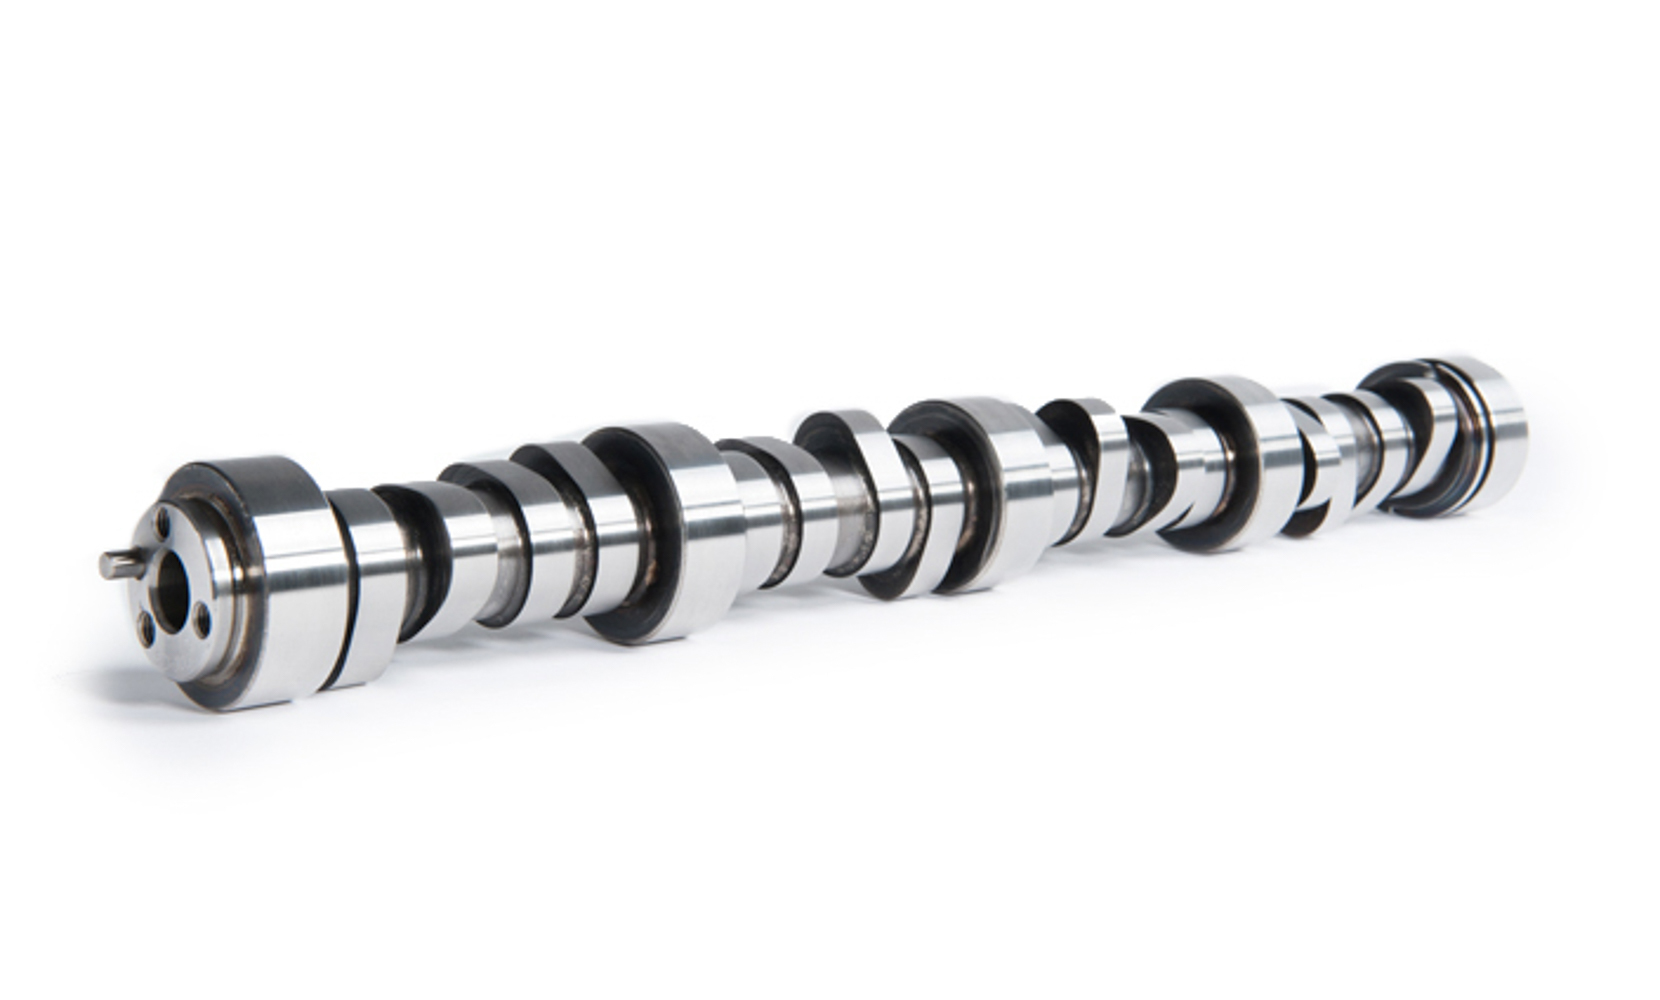 Cam Motion 03-01-0019 Camshaft, Titan King, Hydraulic Roller, Lift 0.621 / 0.604 in, Duration 232 / 244, 112 LSA, 3500 / 6700 RPM, GM LS-Series, Each